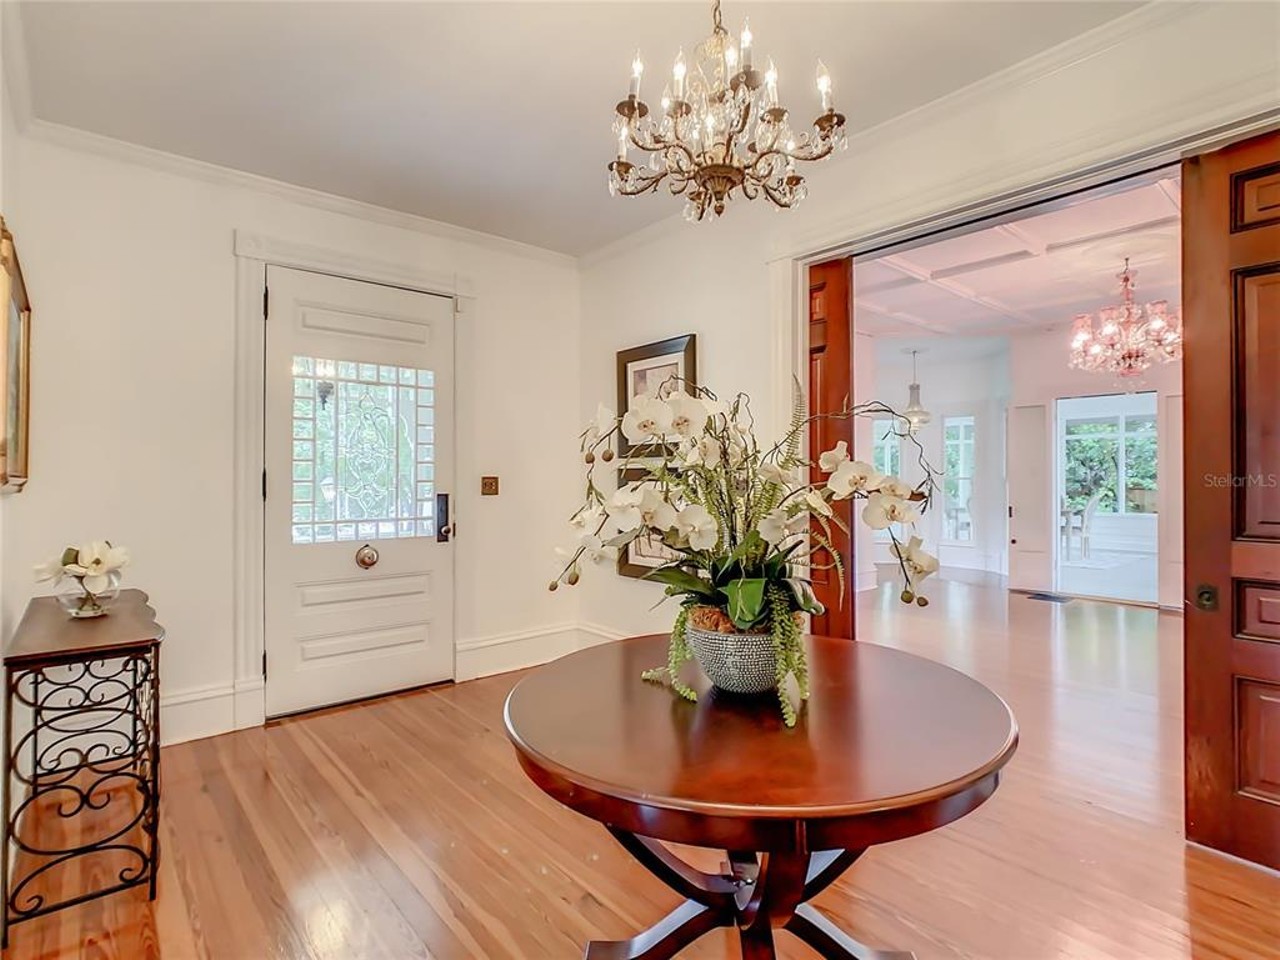 A historic Orlando Queen Anne from the 1800s is on the market for $1.9M